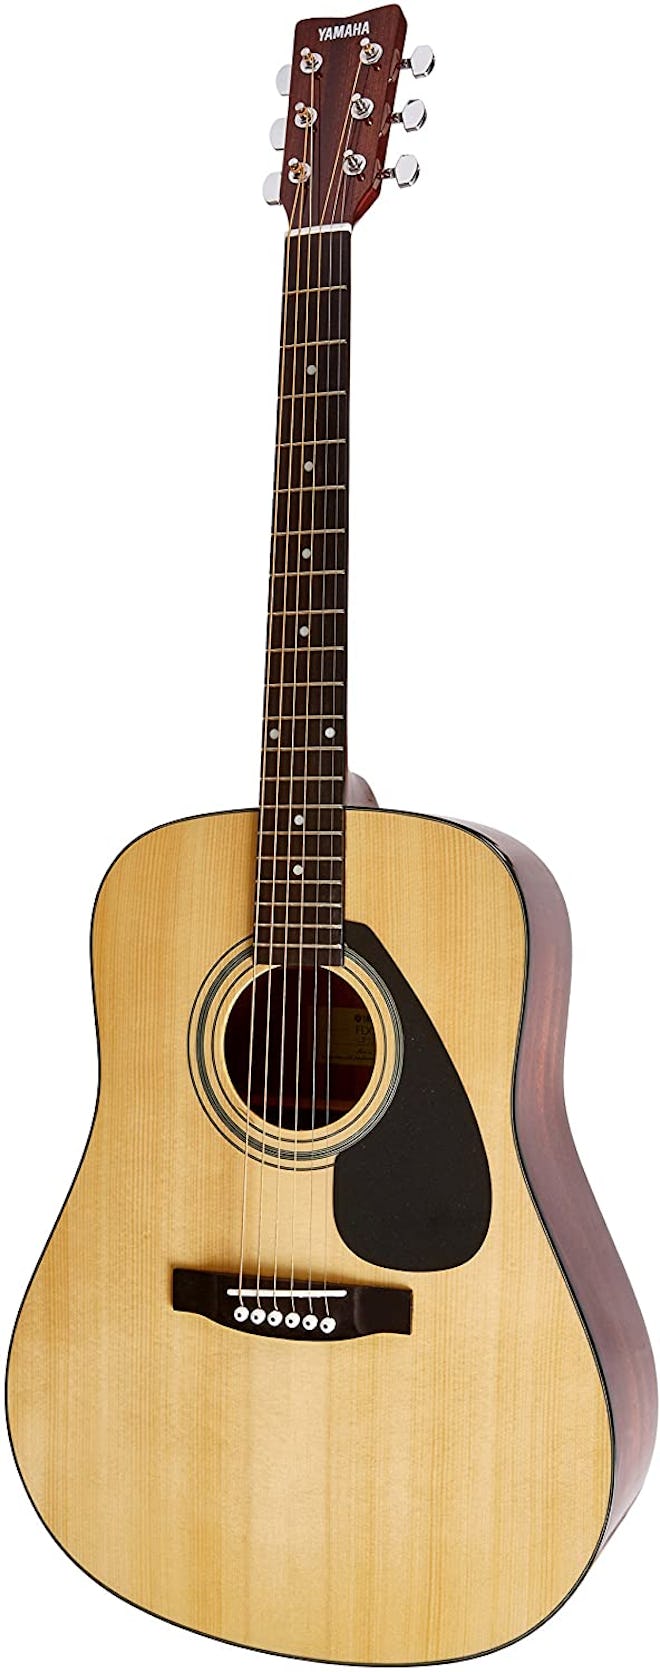 YAMAHA Solid Top Acoustic Guitar